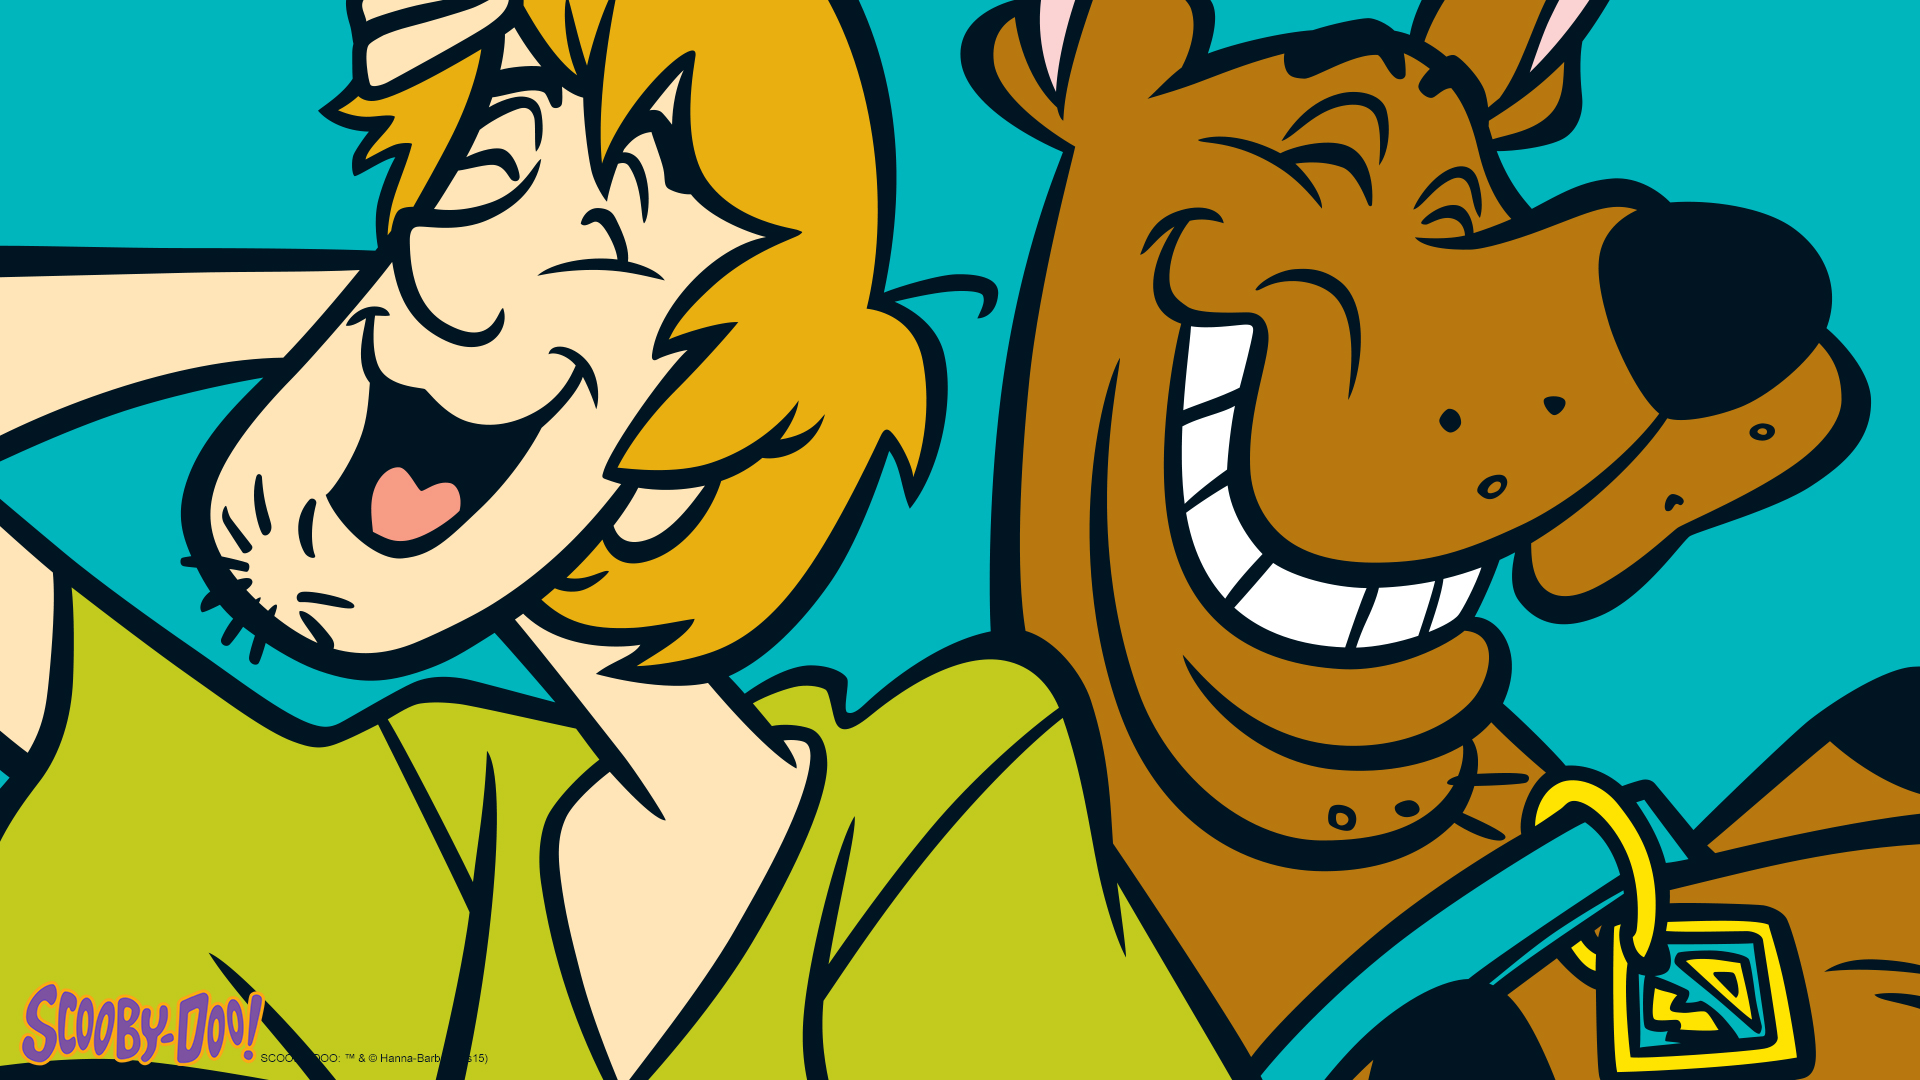 Scooby And Shaggy - Scooby And Shaggy Laughing , HD Wallpaper & Backgrounds